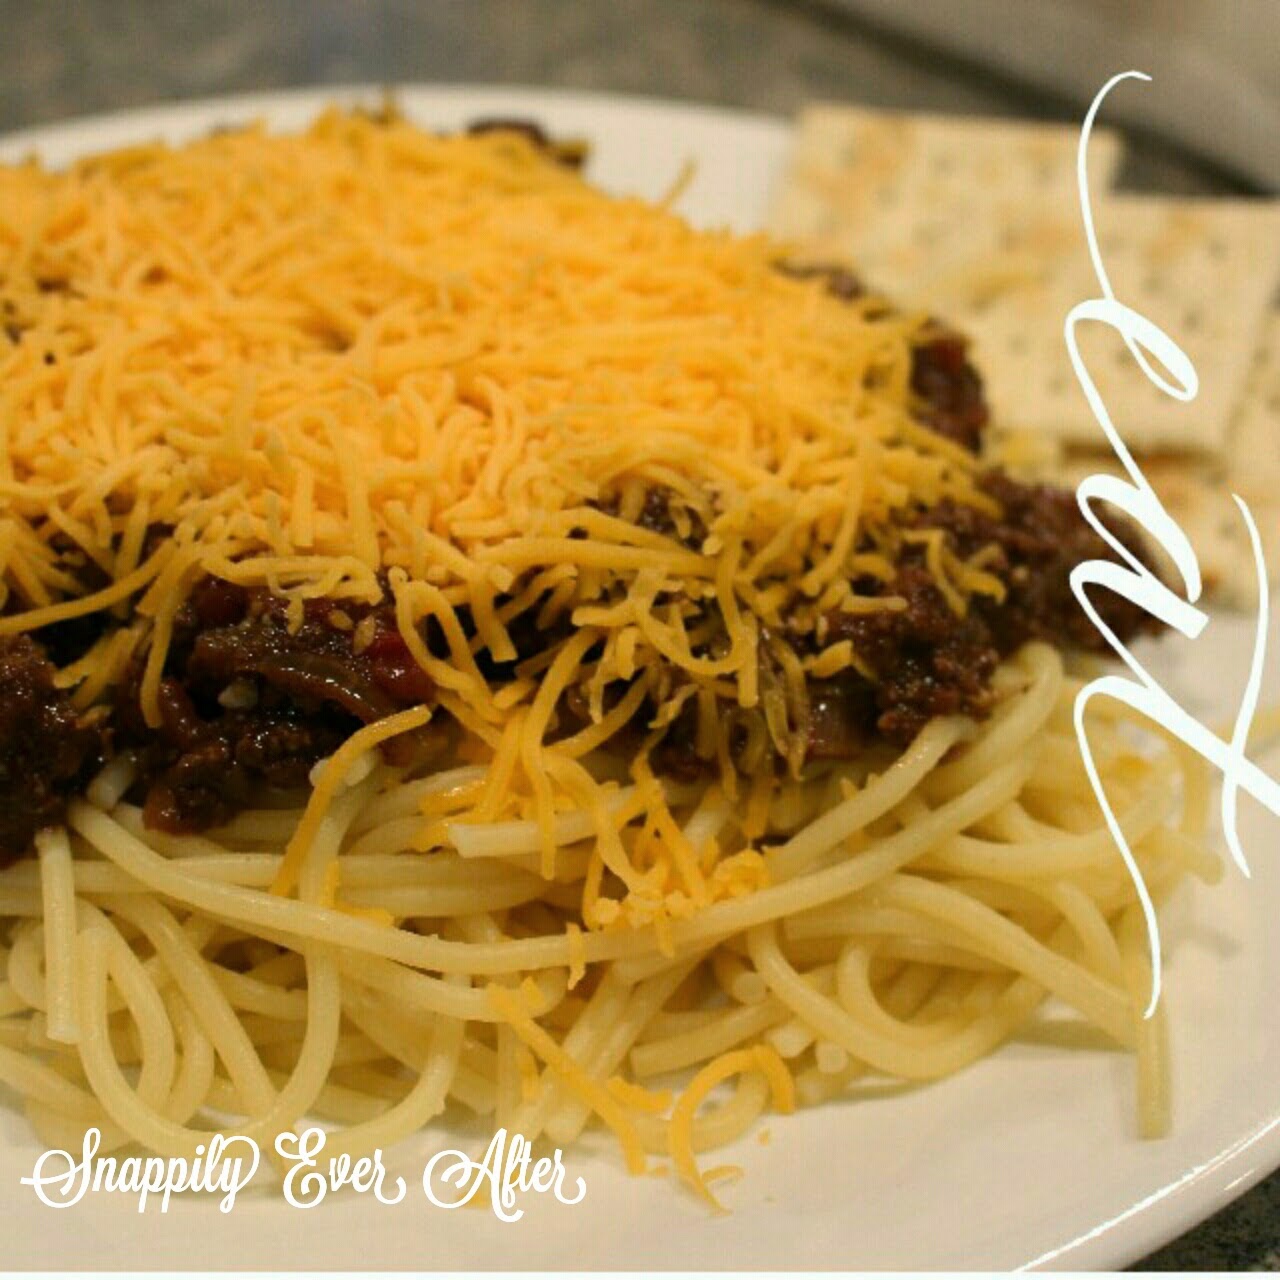 Snappily Ever After: Cincinnati Chili